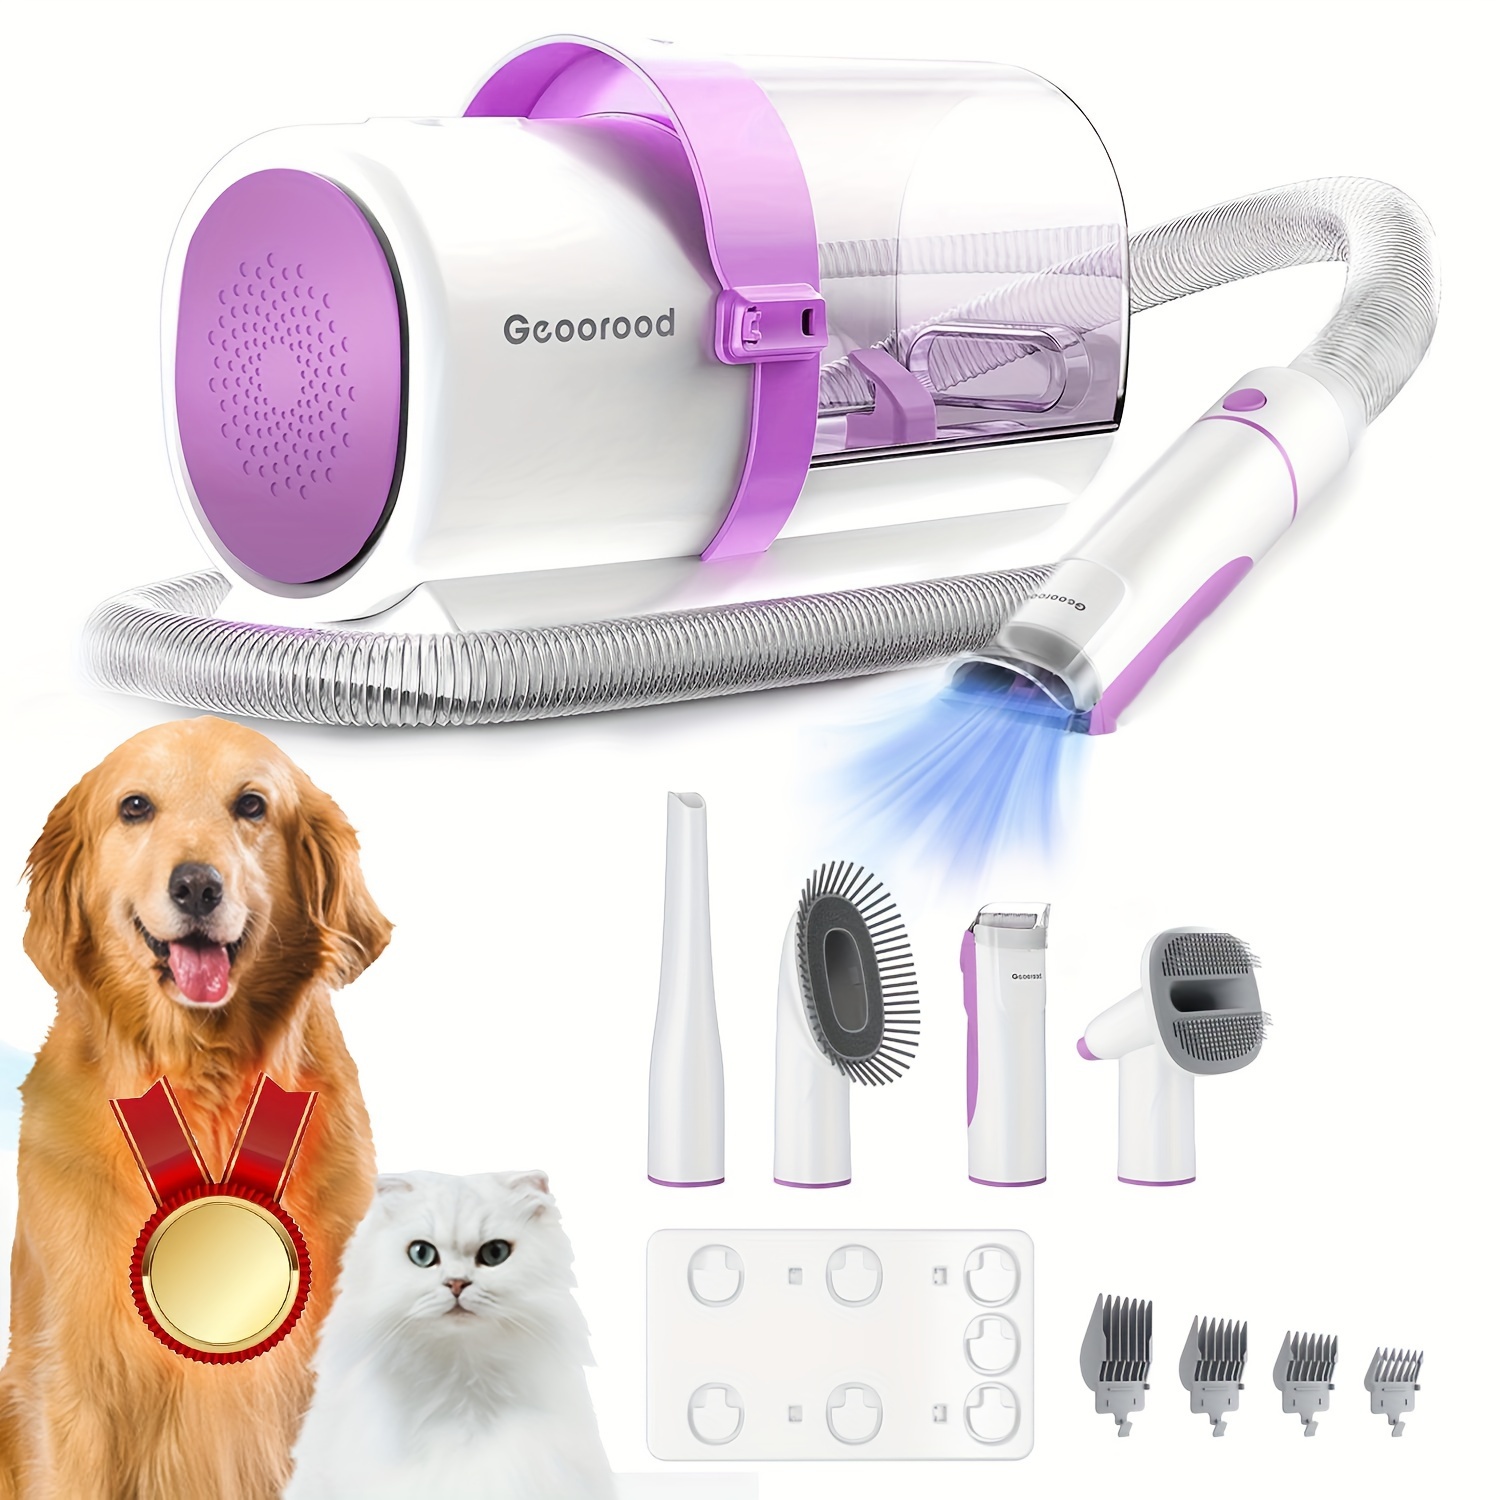 

1pc Pet Hair Vacuum Grooming Kit For Dogs And Cats, 2.5l Large Capacity Dust Cup, Easy Cleaning, Includes Multiple Attachments And Brushes For All Pet Sizes